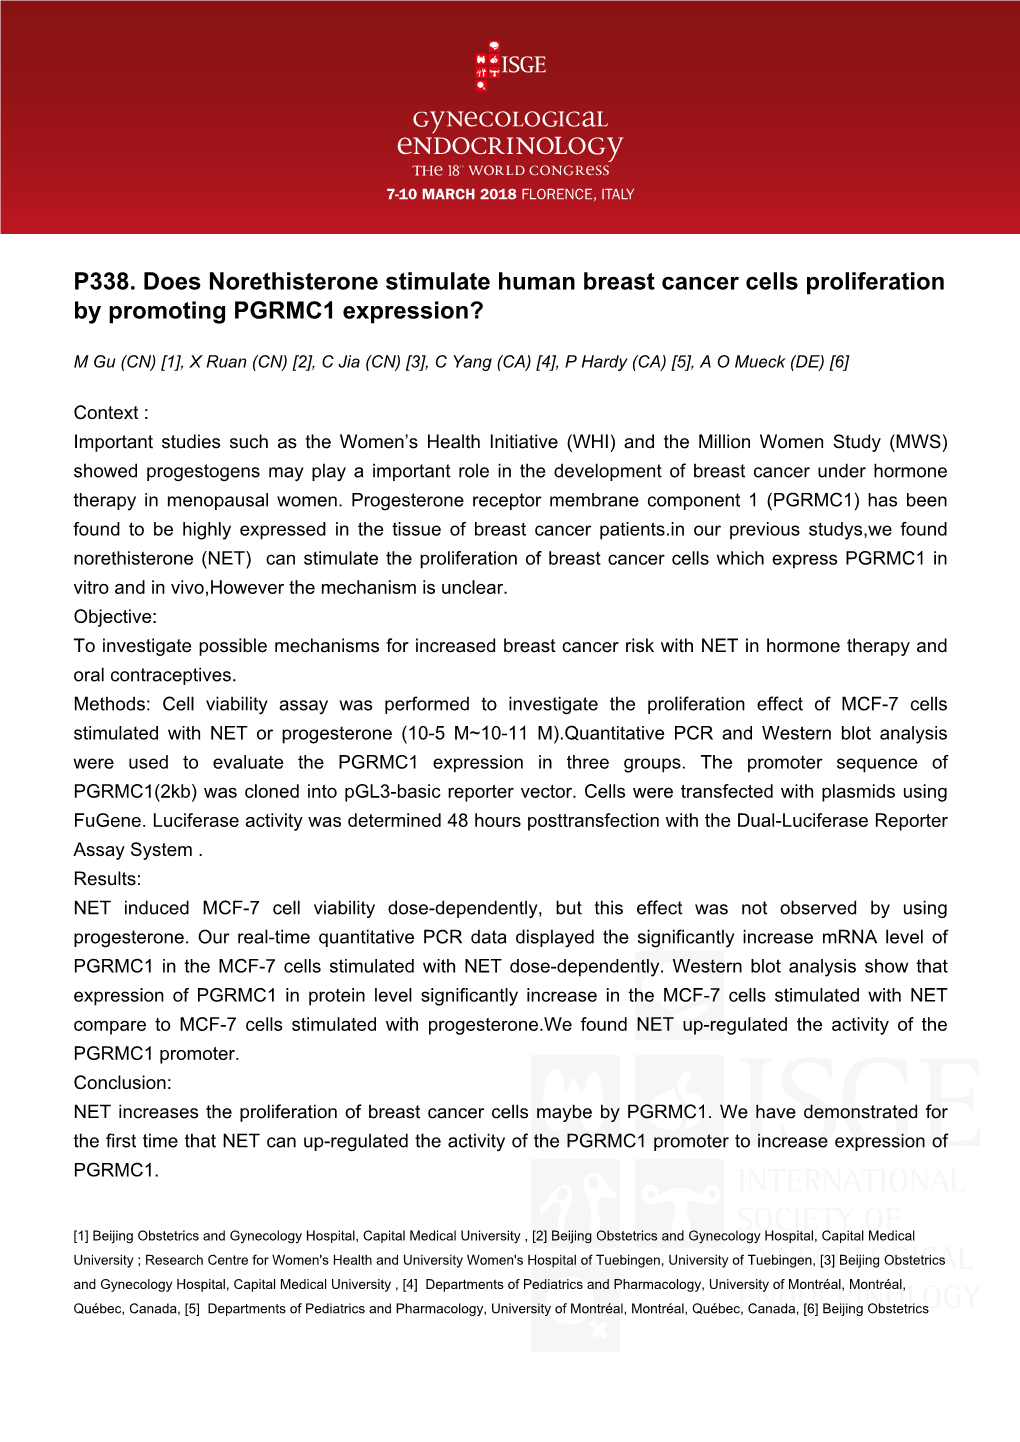 P338. Does Norethisterone Stimulate Human Breast Cancer Cells Proliferation by Promoting PGRMC1 Expression?